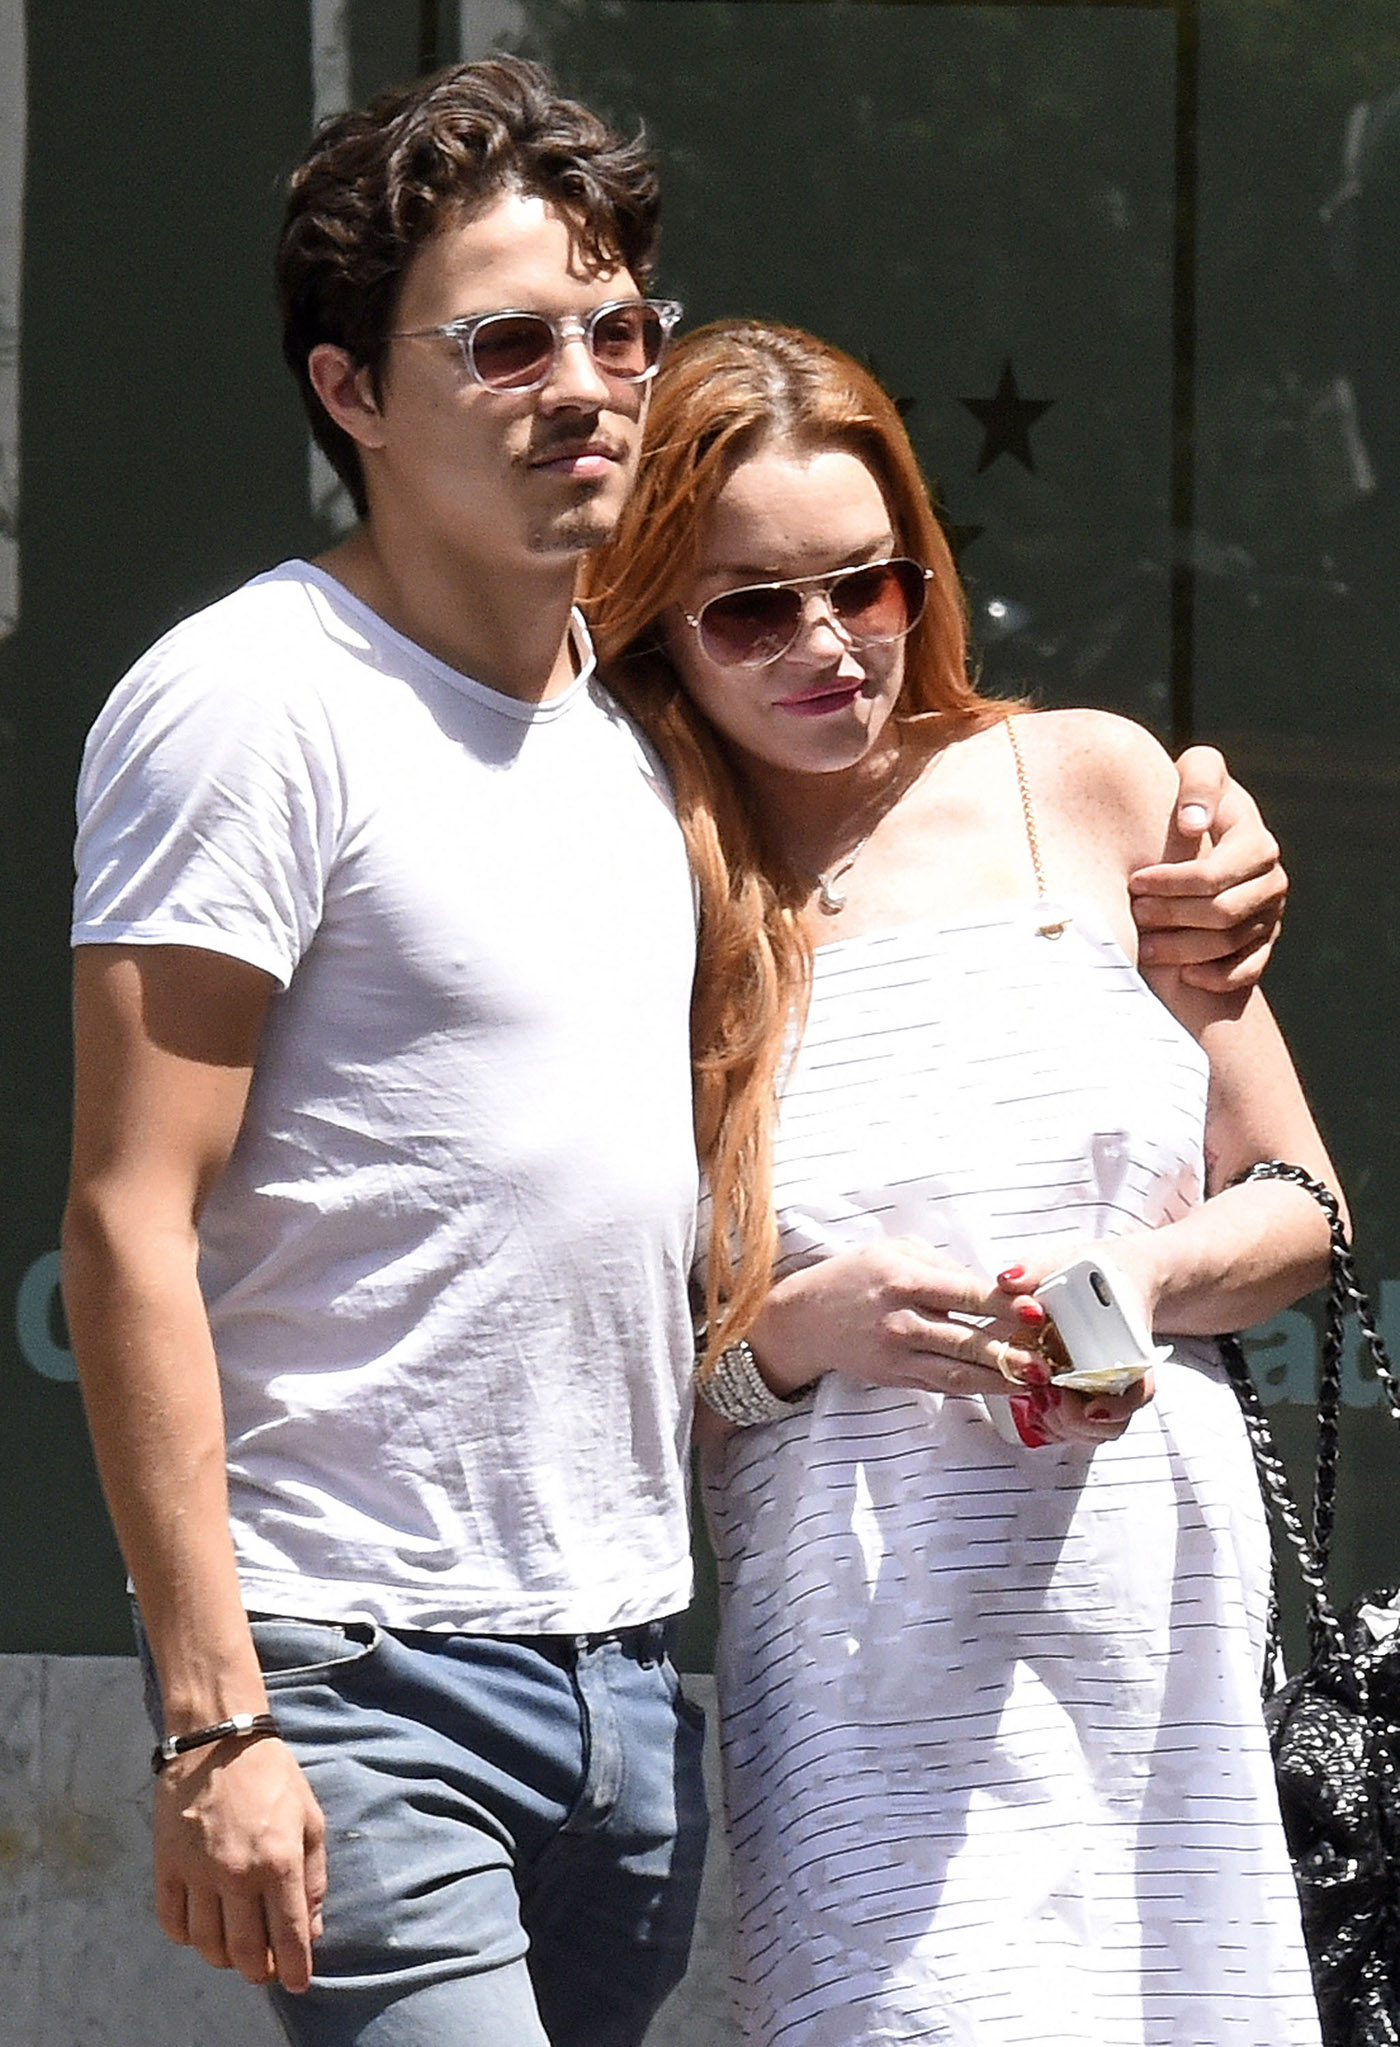 52088170 Actress Lindsay Lohan and fiance Egor Tarabasov spending the day together in Madrid, Spain on June 10, 2016. Egor has been planning a huge 30th birthday bash for Lindsay on July 2nd in Greece. FameFlynet, Inc - Beverly Hills, CA, USA - +1 (310) 505-9876 RESTRICTIONS APPLY: USA/AUSTRALIA ONLY